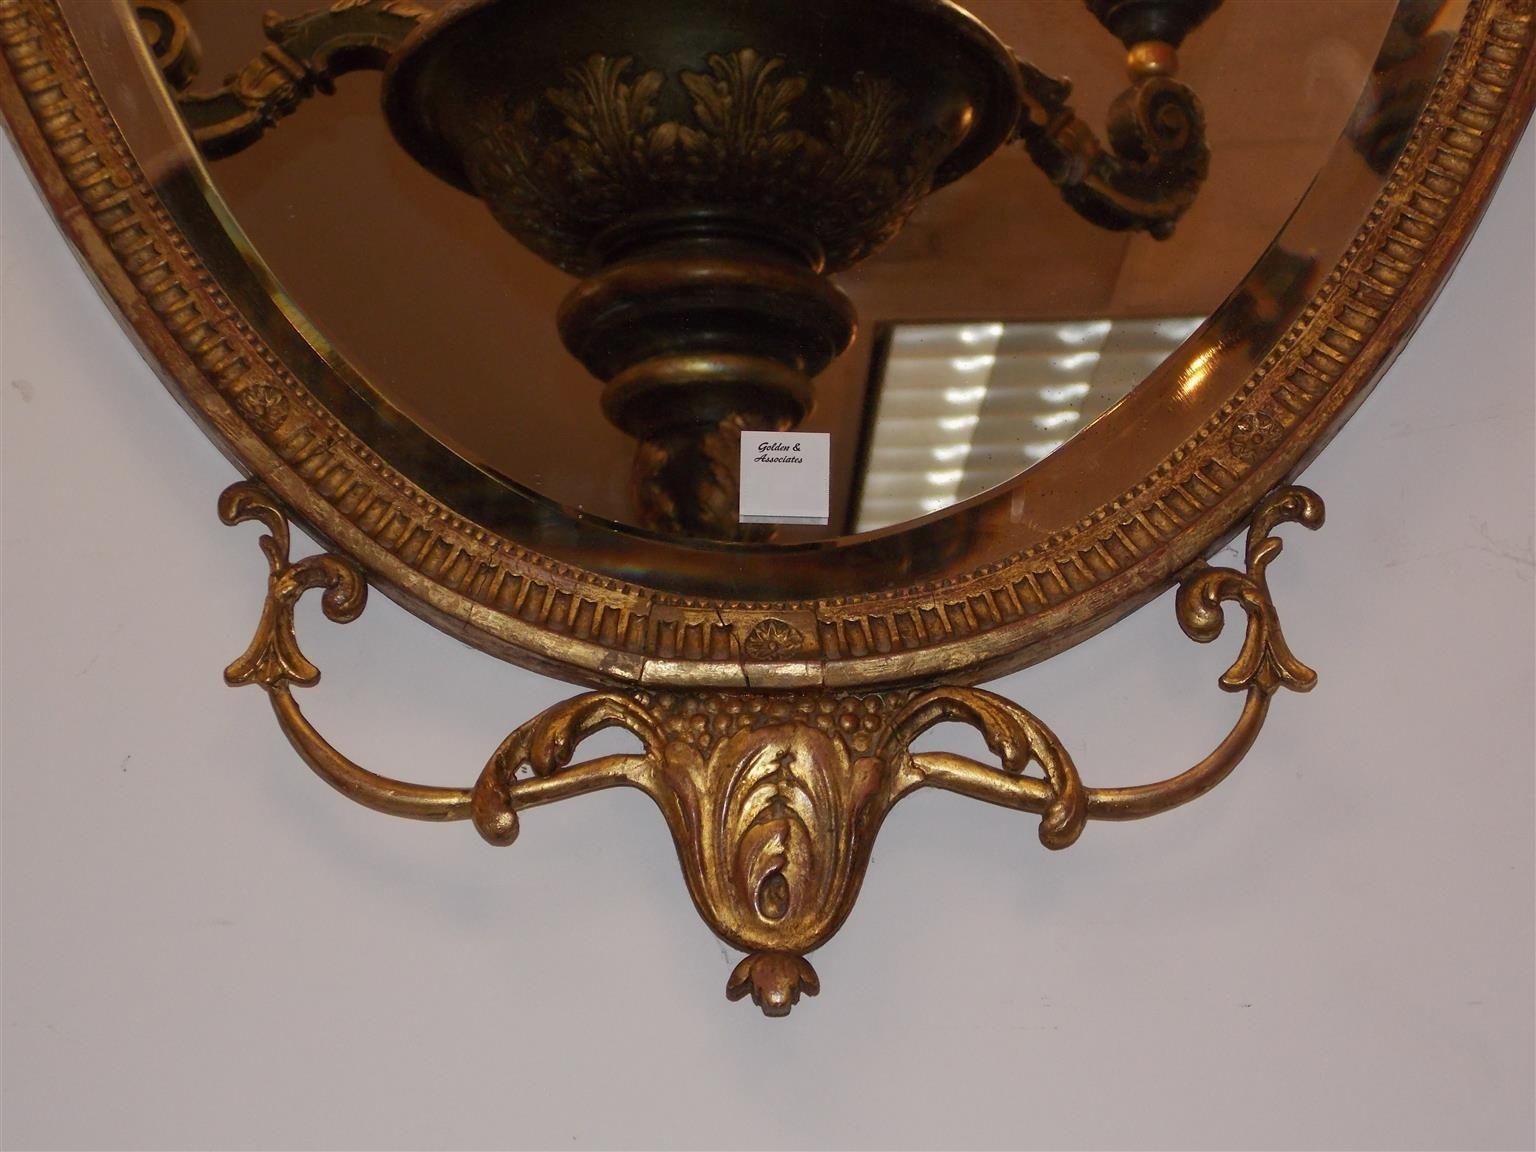 Pair of English Adam Oval Urn & Bell Flower Mirrors with Beveled Glass, C. 1800 For Sale 2